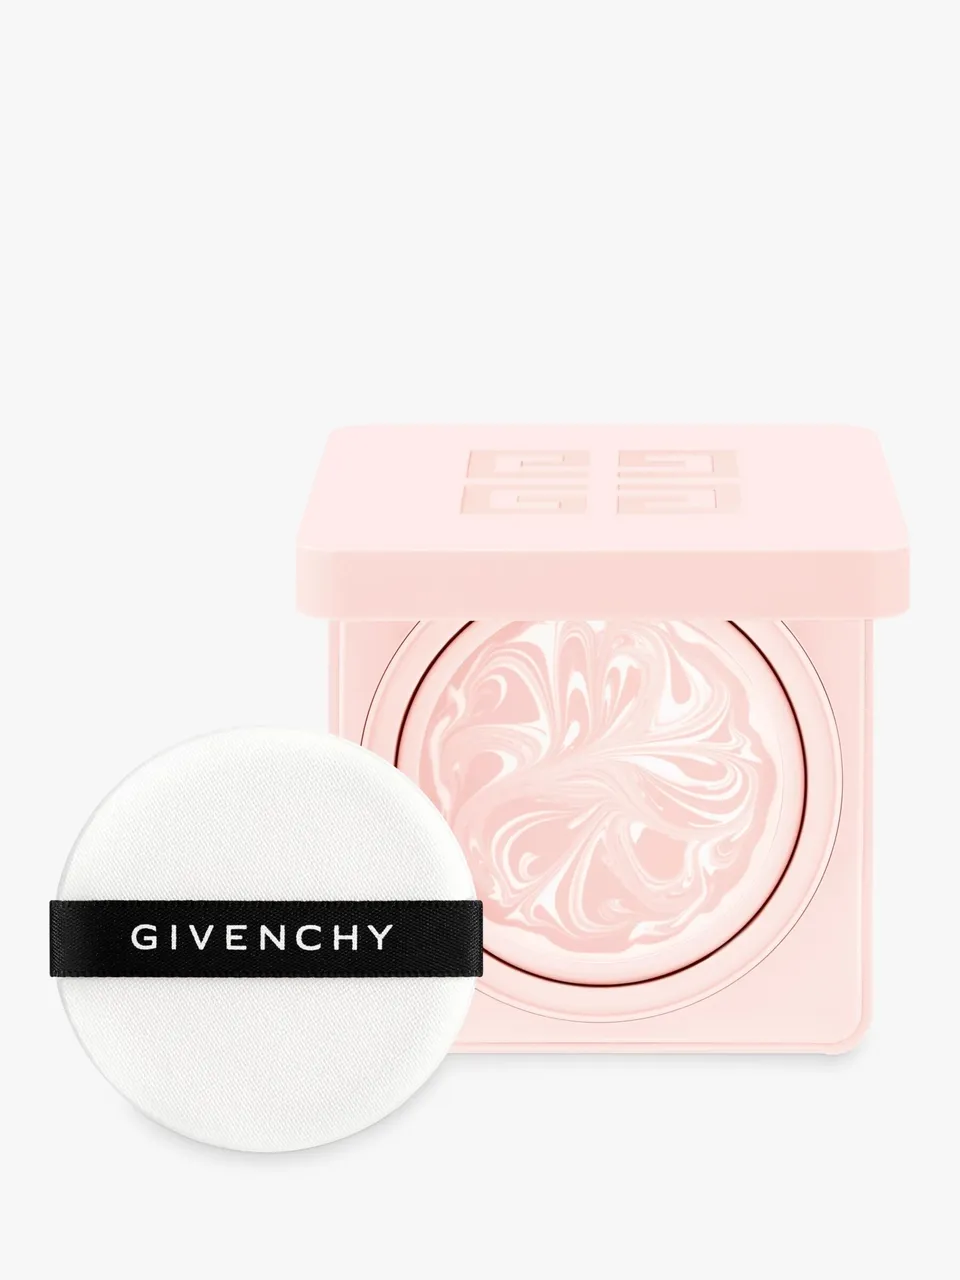 Givenchy Skin Perfecto Compact Cream SPF 30 PA++, 12g - Pink - Unisex